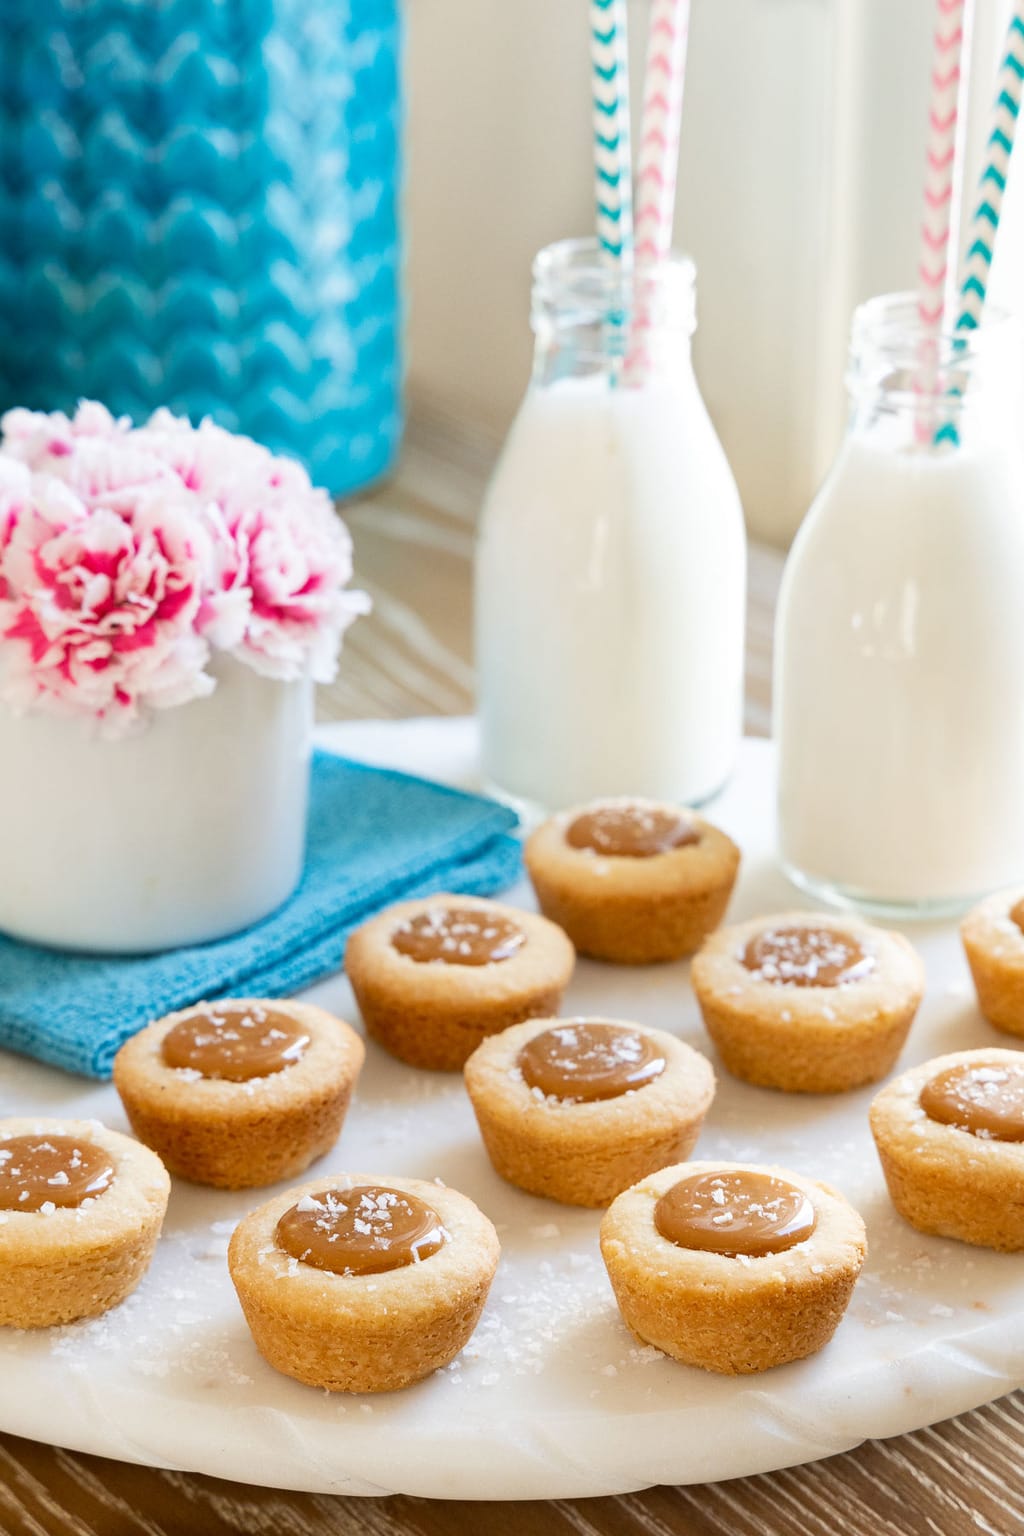 Vertical picture of Salted Caramel Shortbread Bites with jars of milk and pink flowers